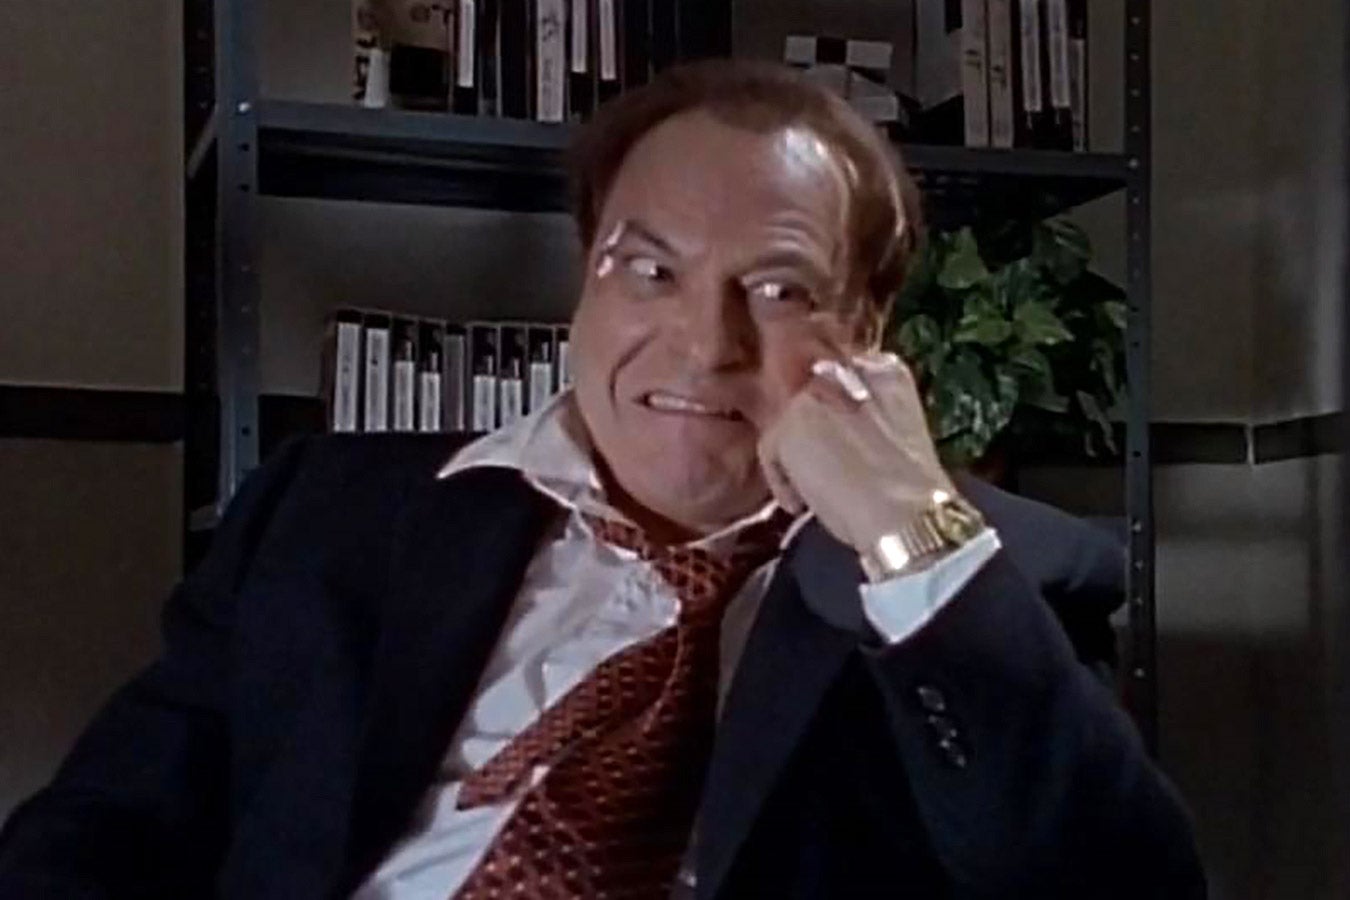 Rip Torn, in a suit and tie, grimaces and rests his head on his hand.